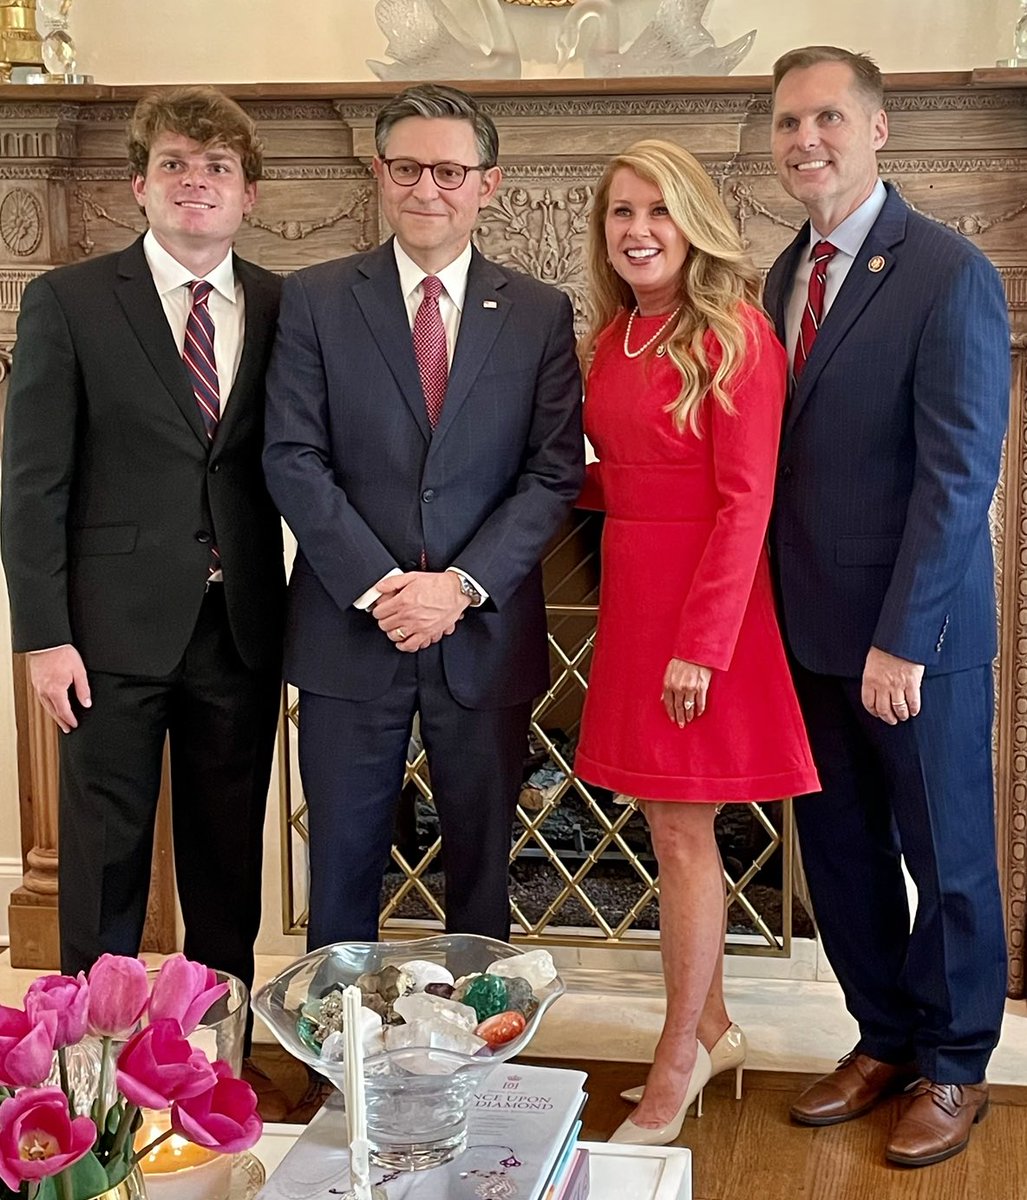 It was great to have the Speaker of the U.S. House of Representatives in Mississippi this week. America faces big challenges and we are working hard in the House to promote a conservative agenda to get our country back on the right track.